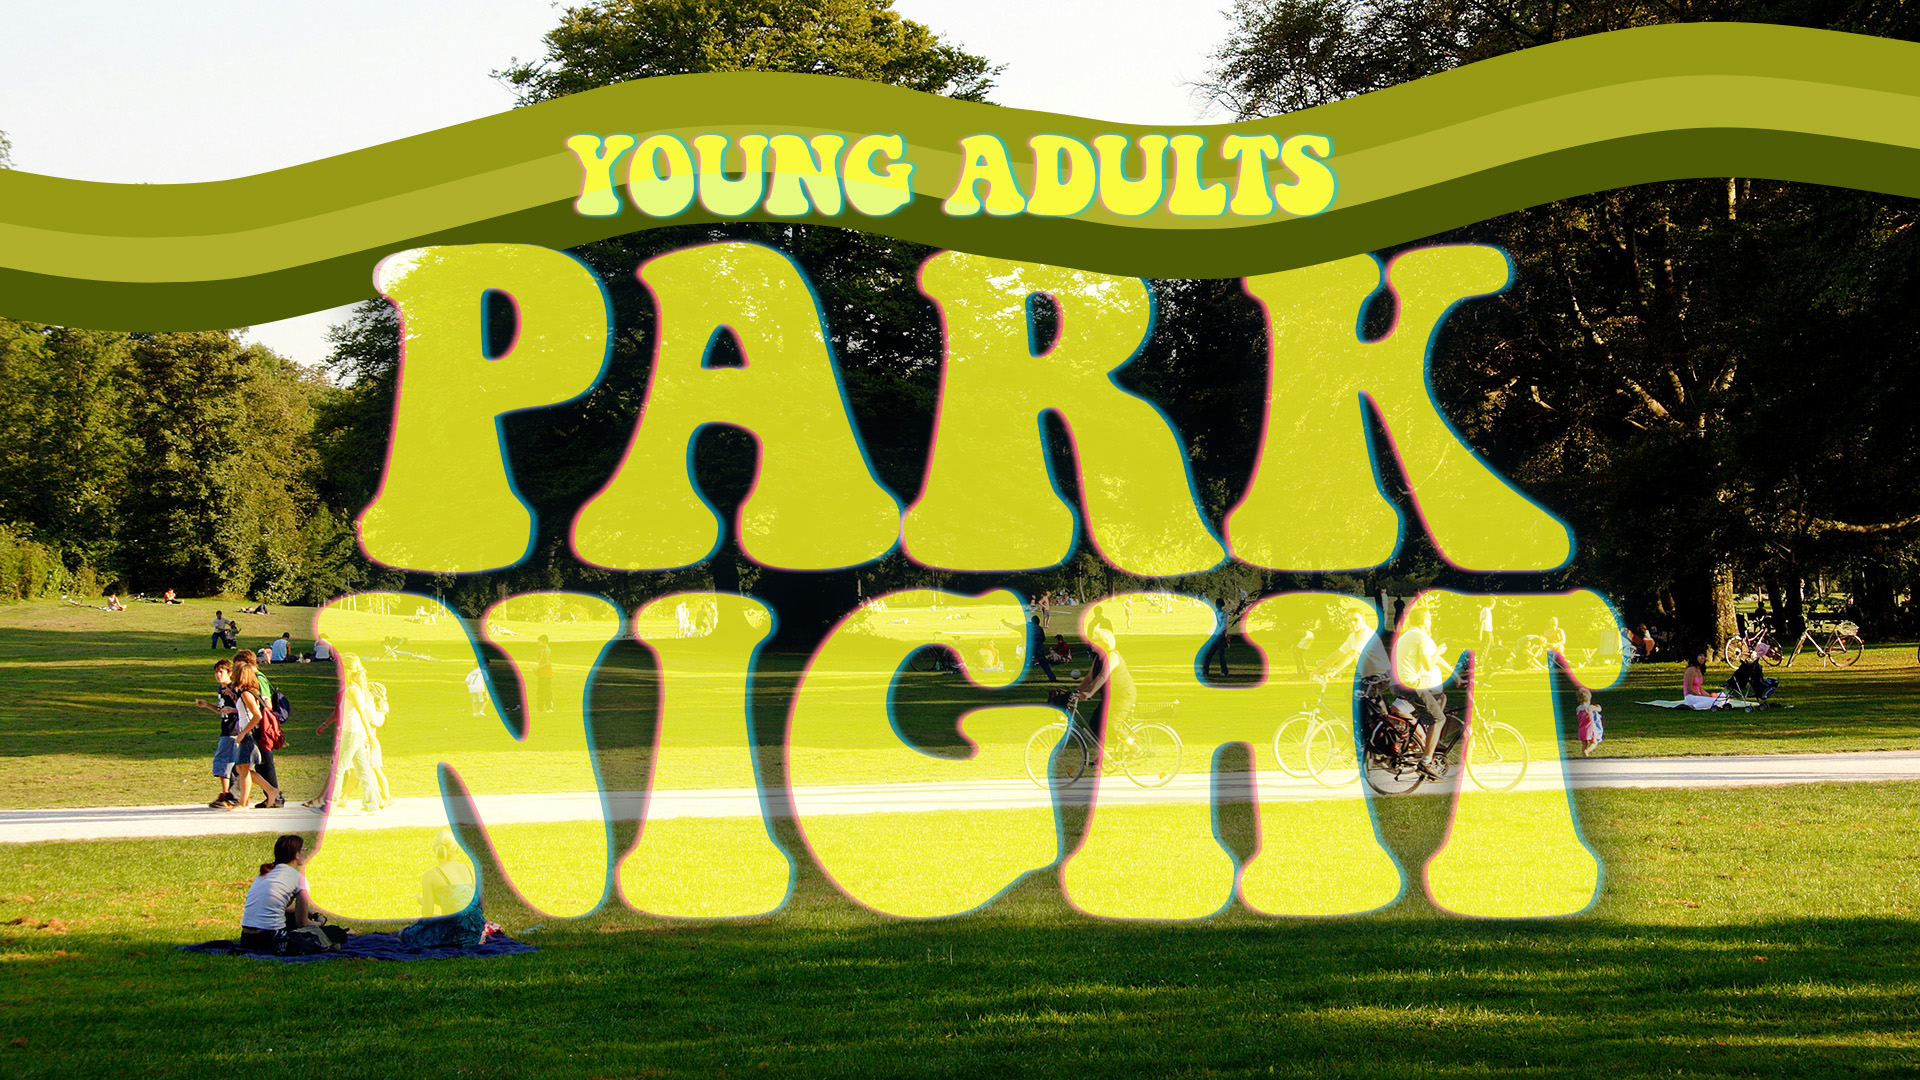 Young Adults Park Night

Monday | 6:30 - 8:30pm
August 12
